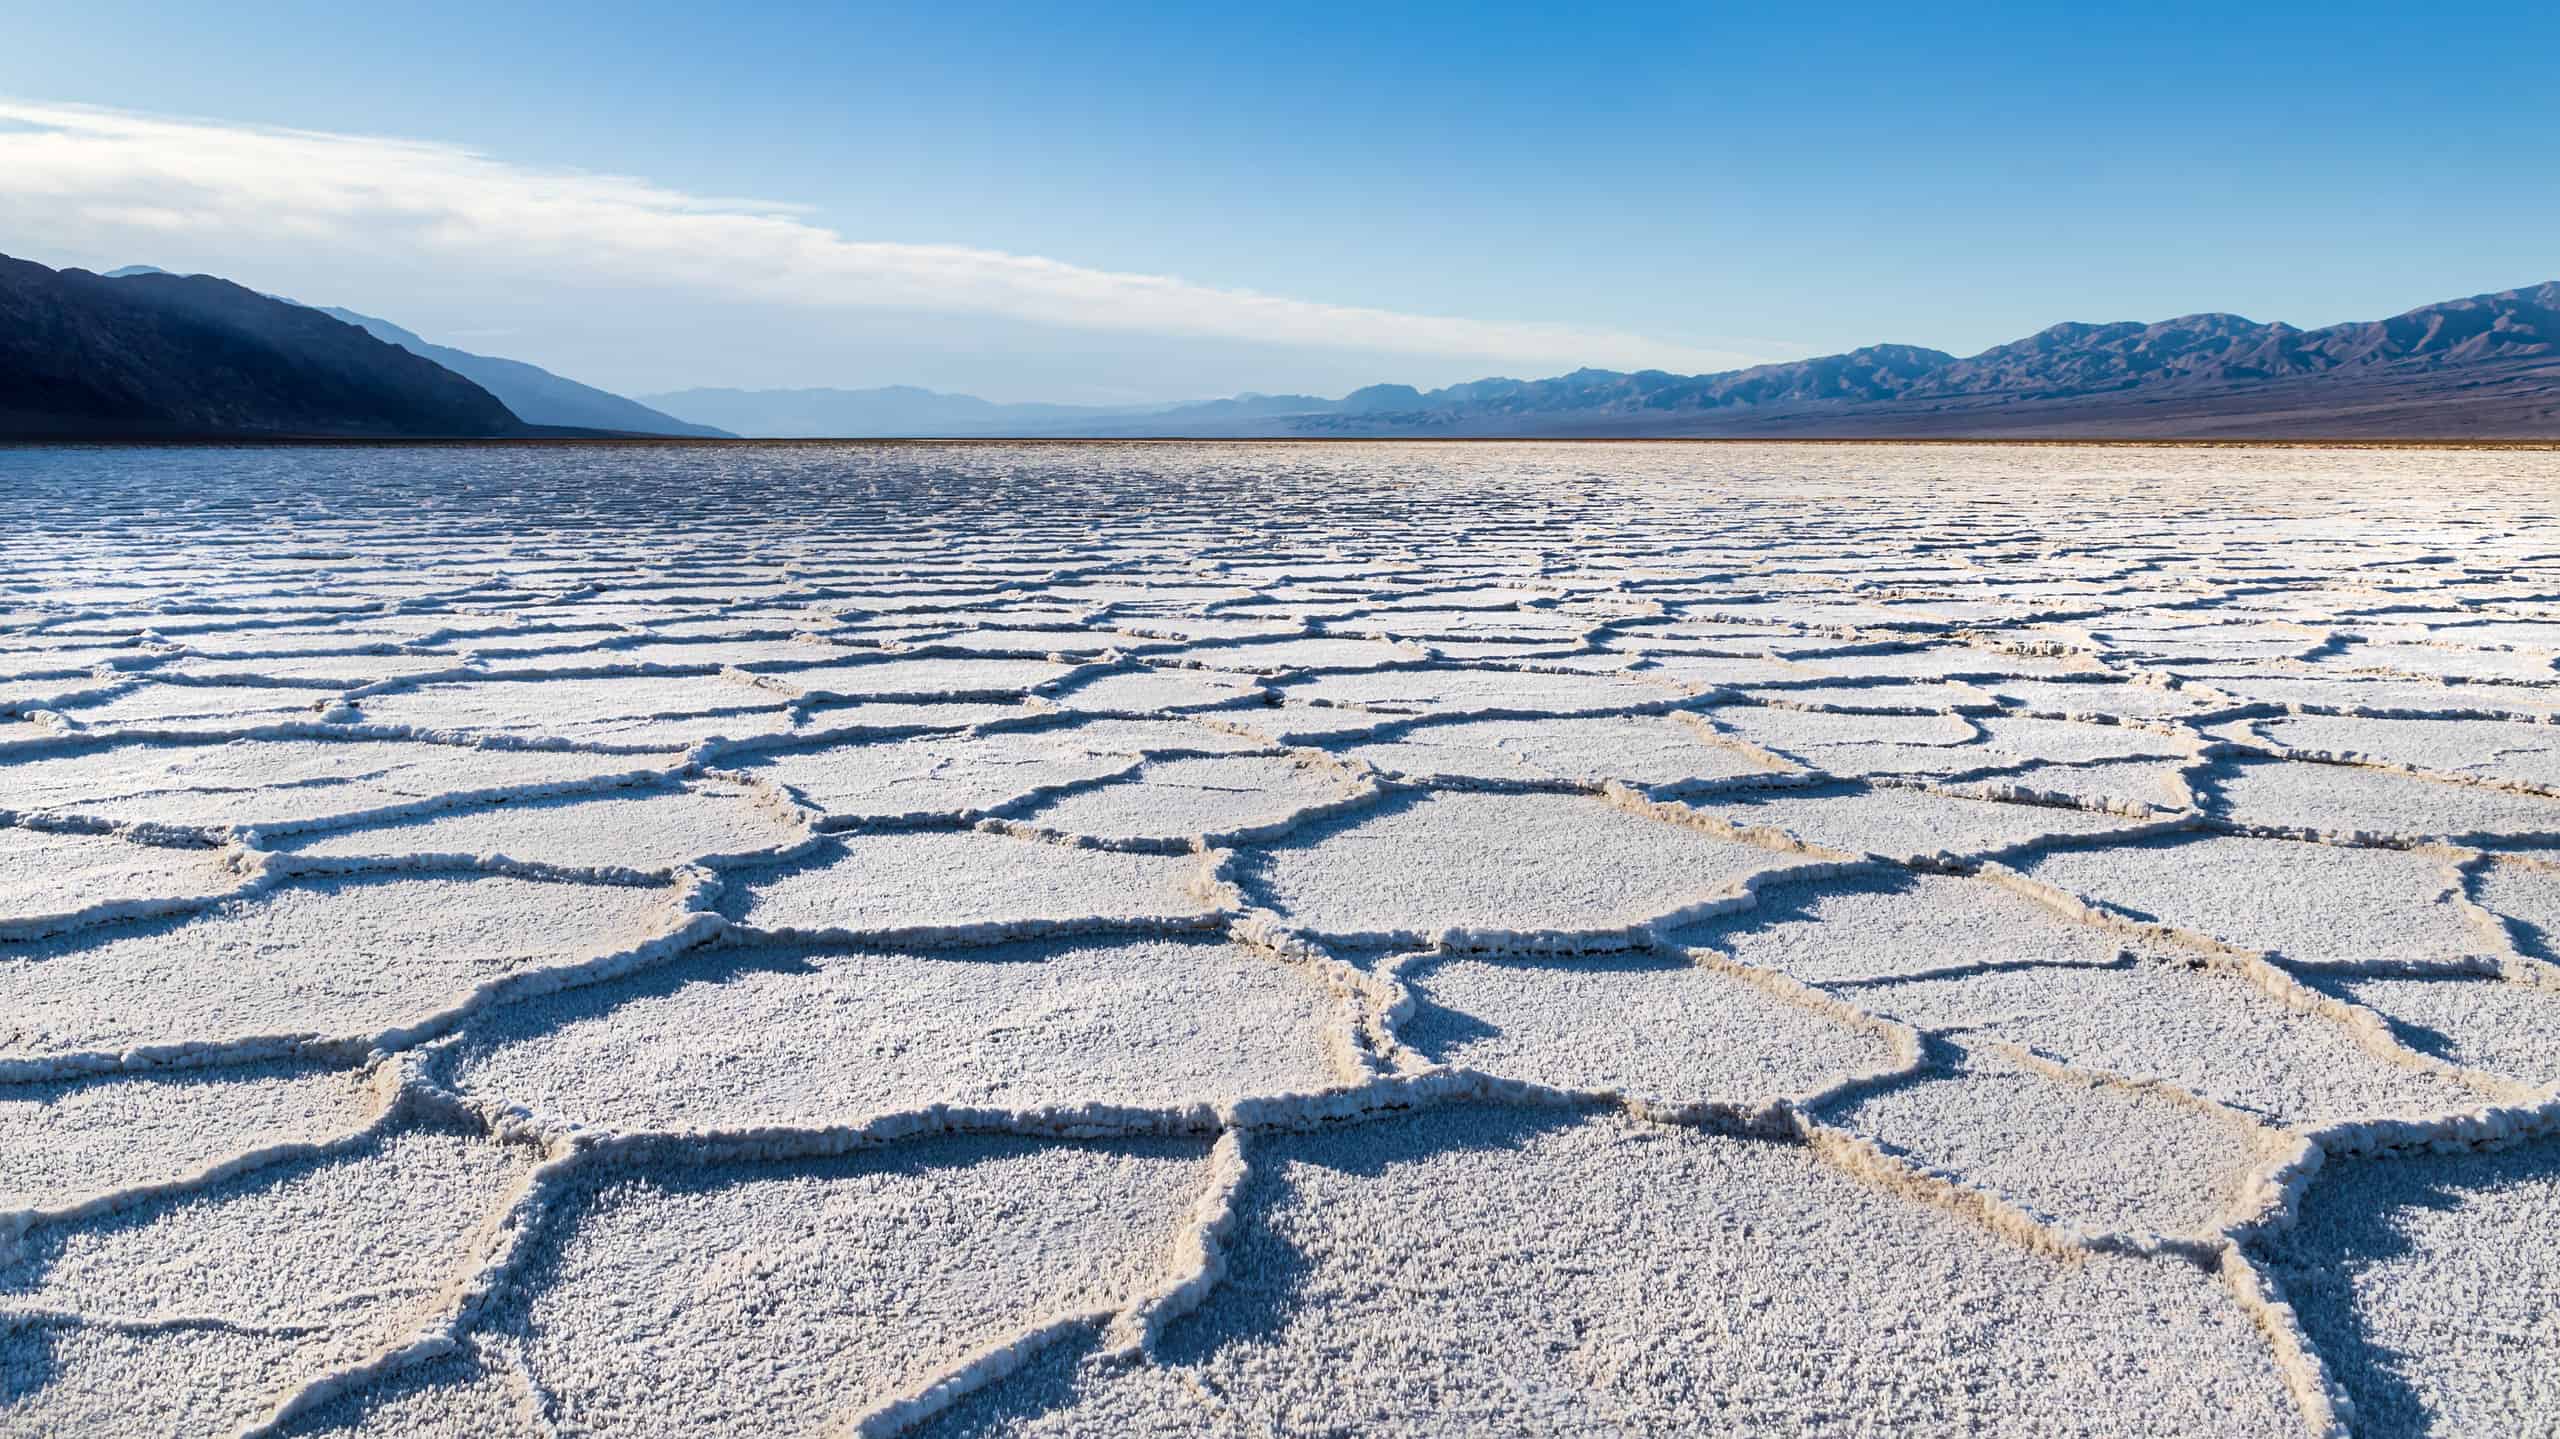 Sunrise over Badwater Basin, Death Valley, California. Sunburst over the far mountains; the basin floor is covered with white salt deposits; snaking crystal formations form hexagonal shapes into the distance.